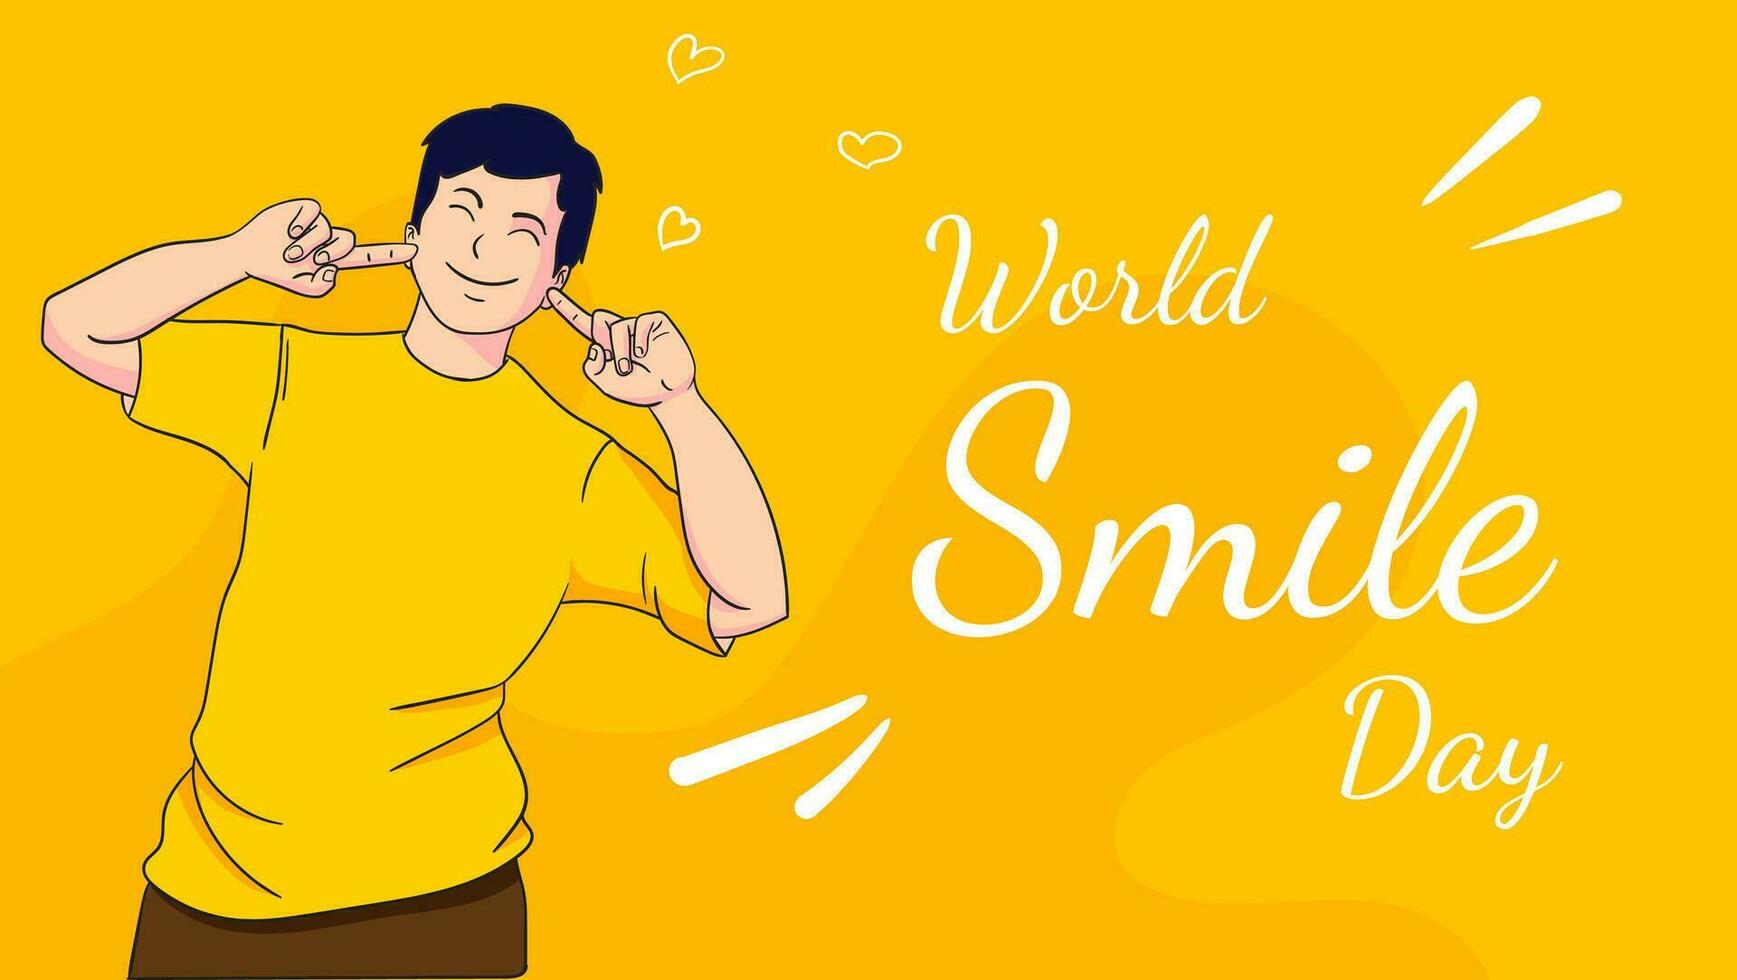 World smile day  greeting card design with cute men flat illustration. can use for banner, poster, greeting card, etc. vector